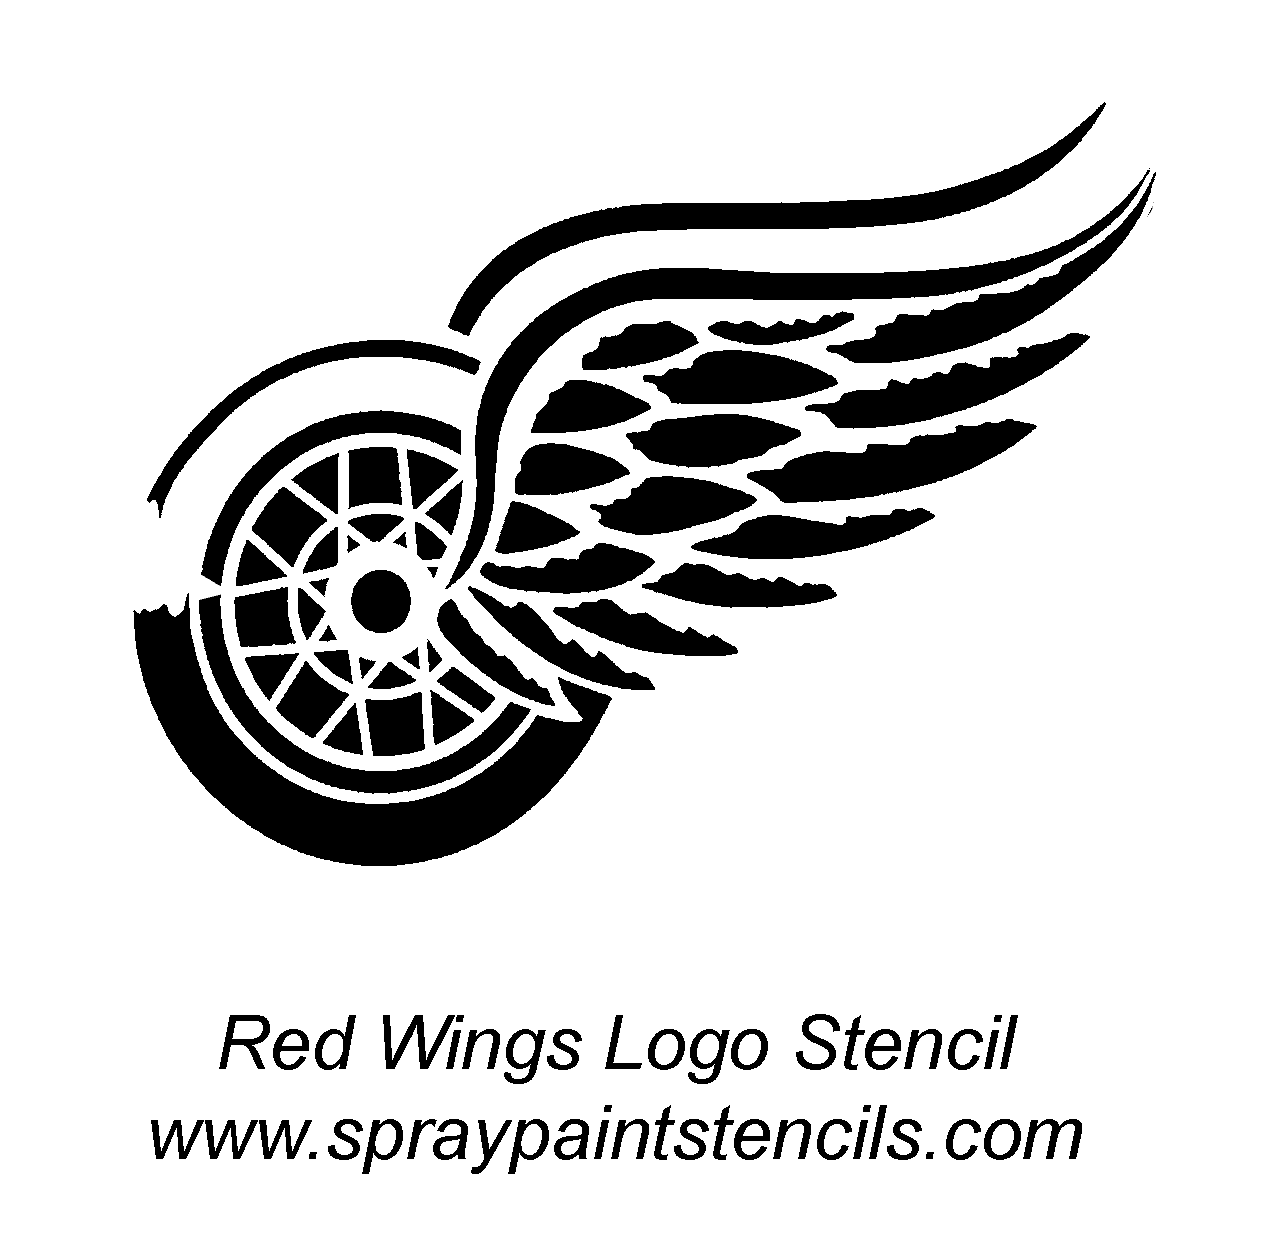 White Picture of Red Wing Logo - Pin by Annette Mackinnon (Torres) on My Redwings | Detroit Red Wings ...